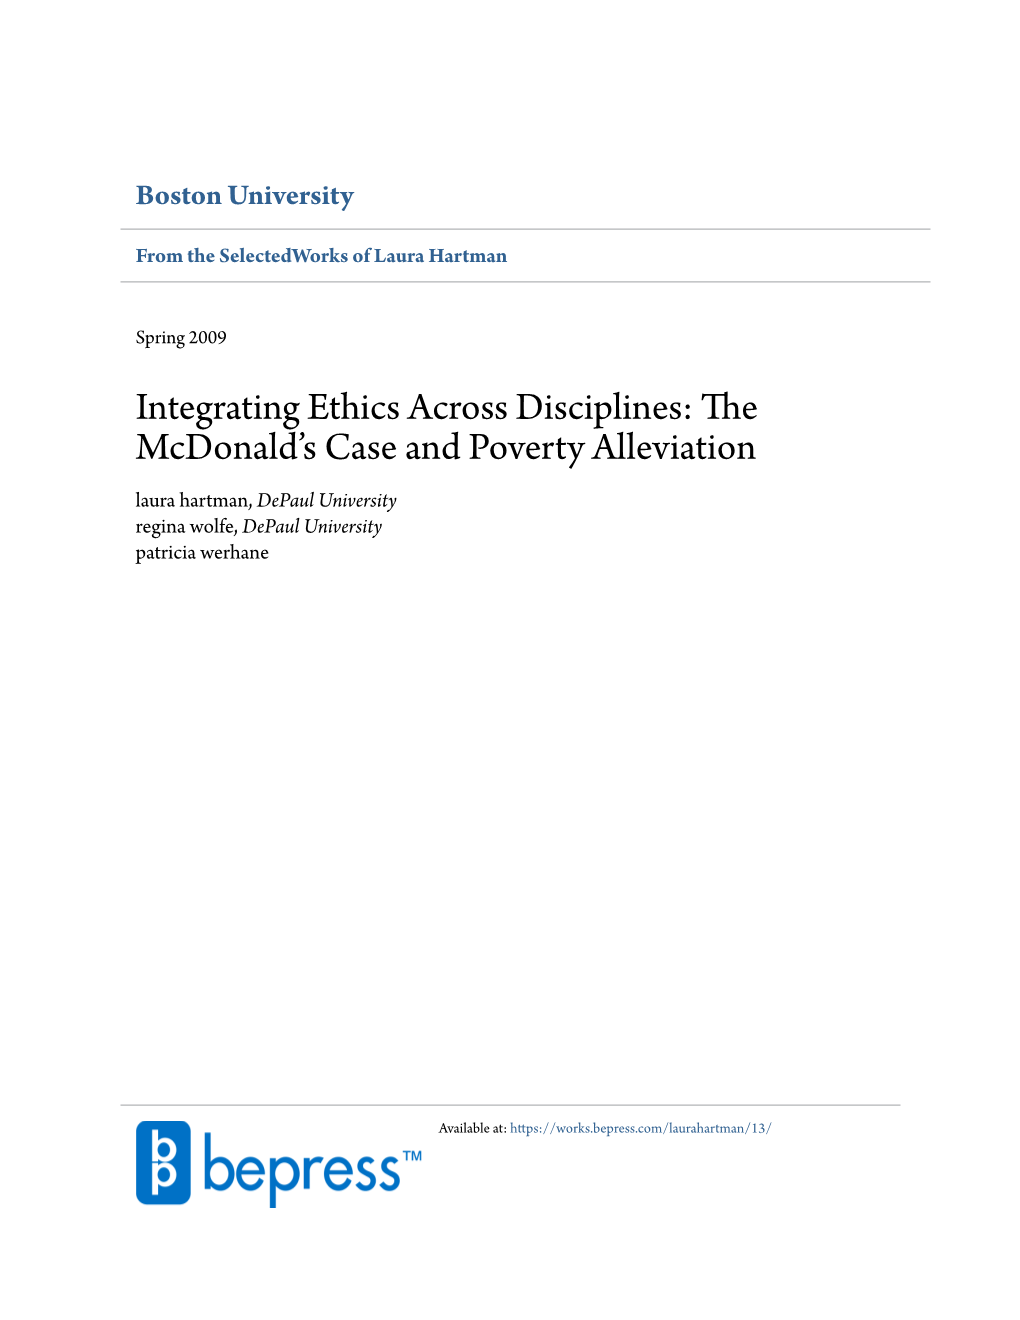 Integrating Ethics Across Disciplines: the Mcdonald's Case and Poverty